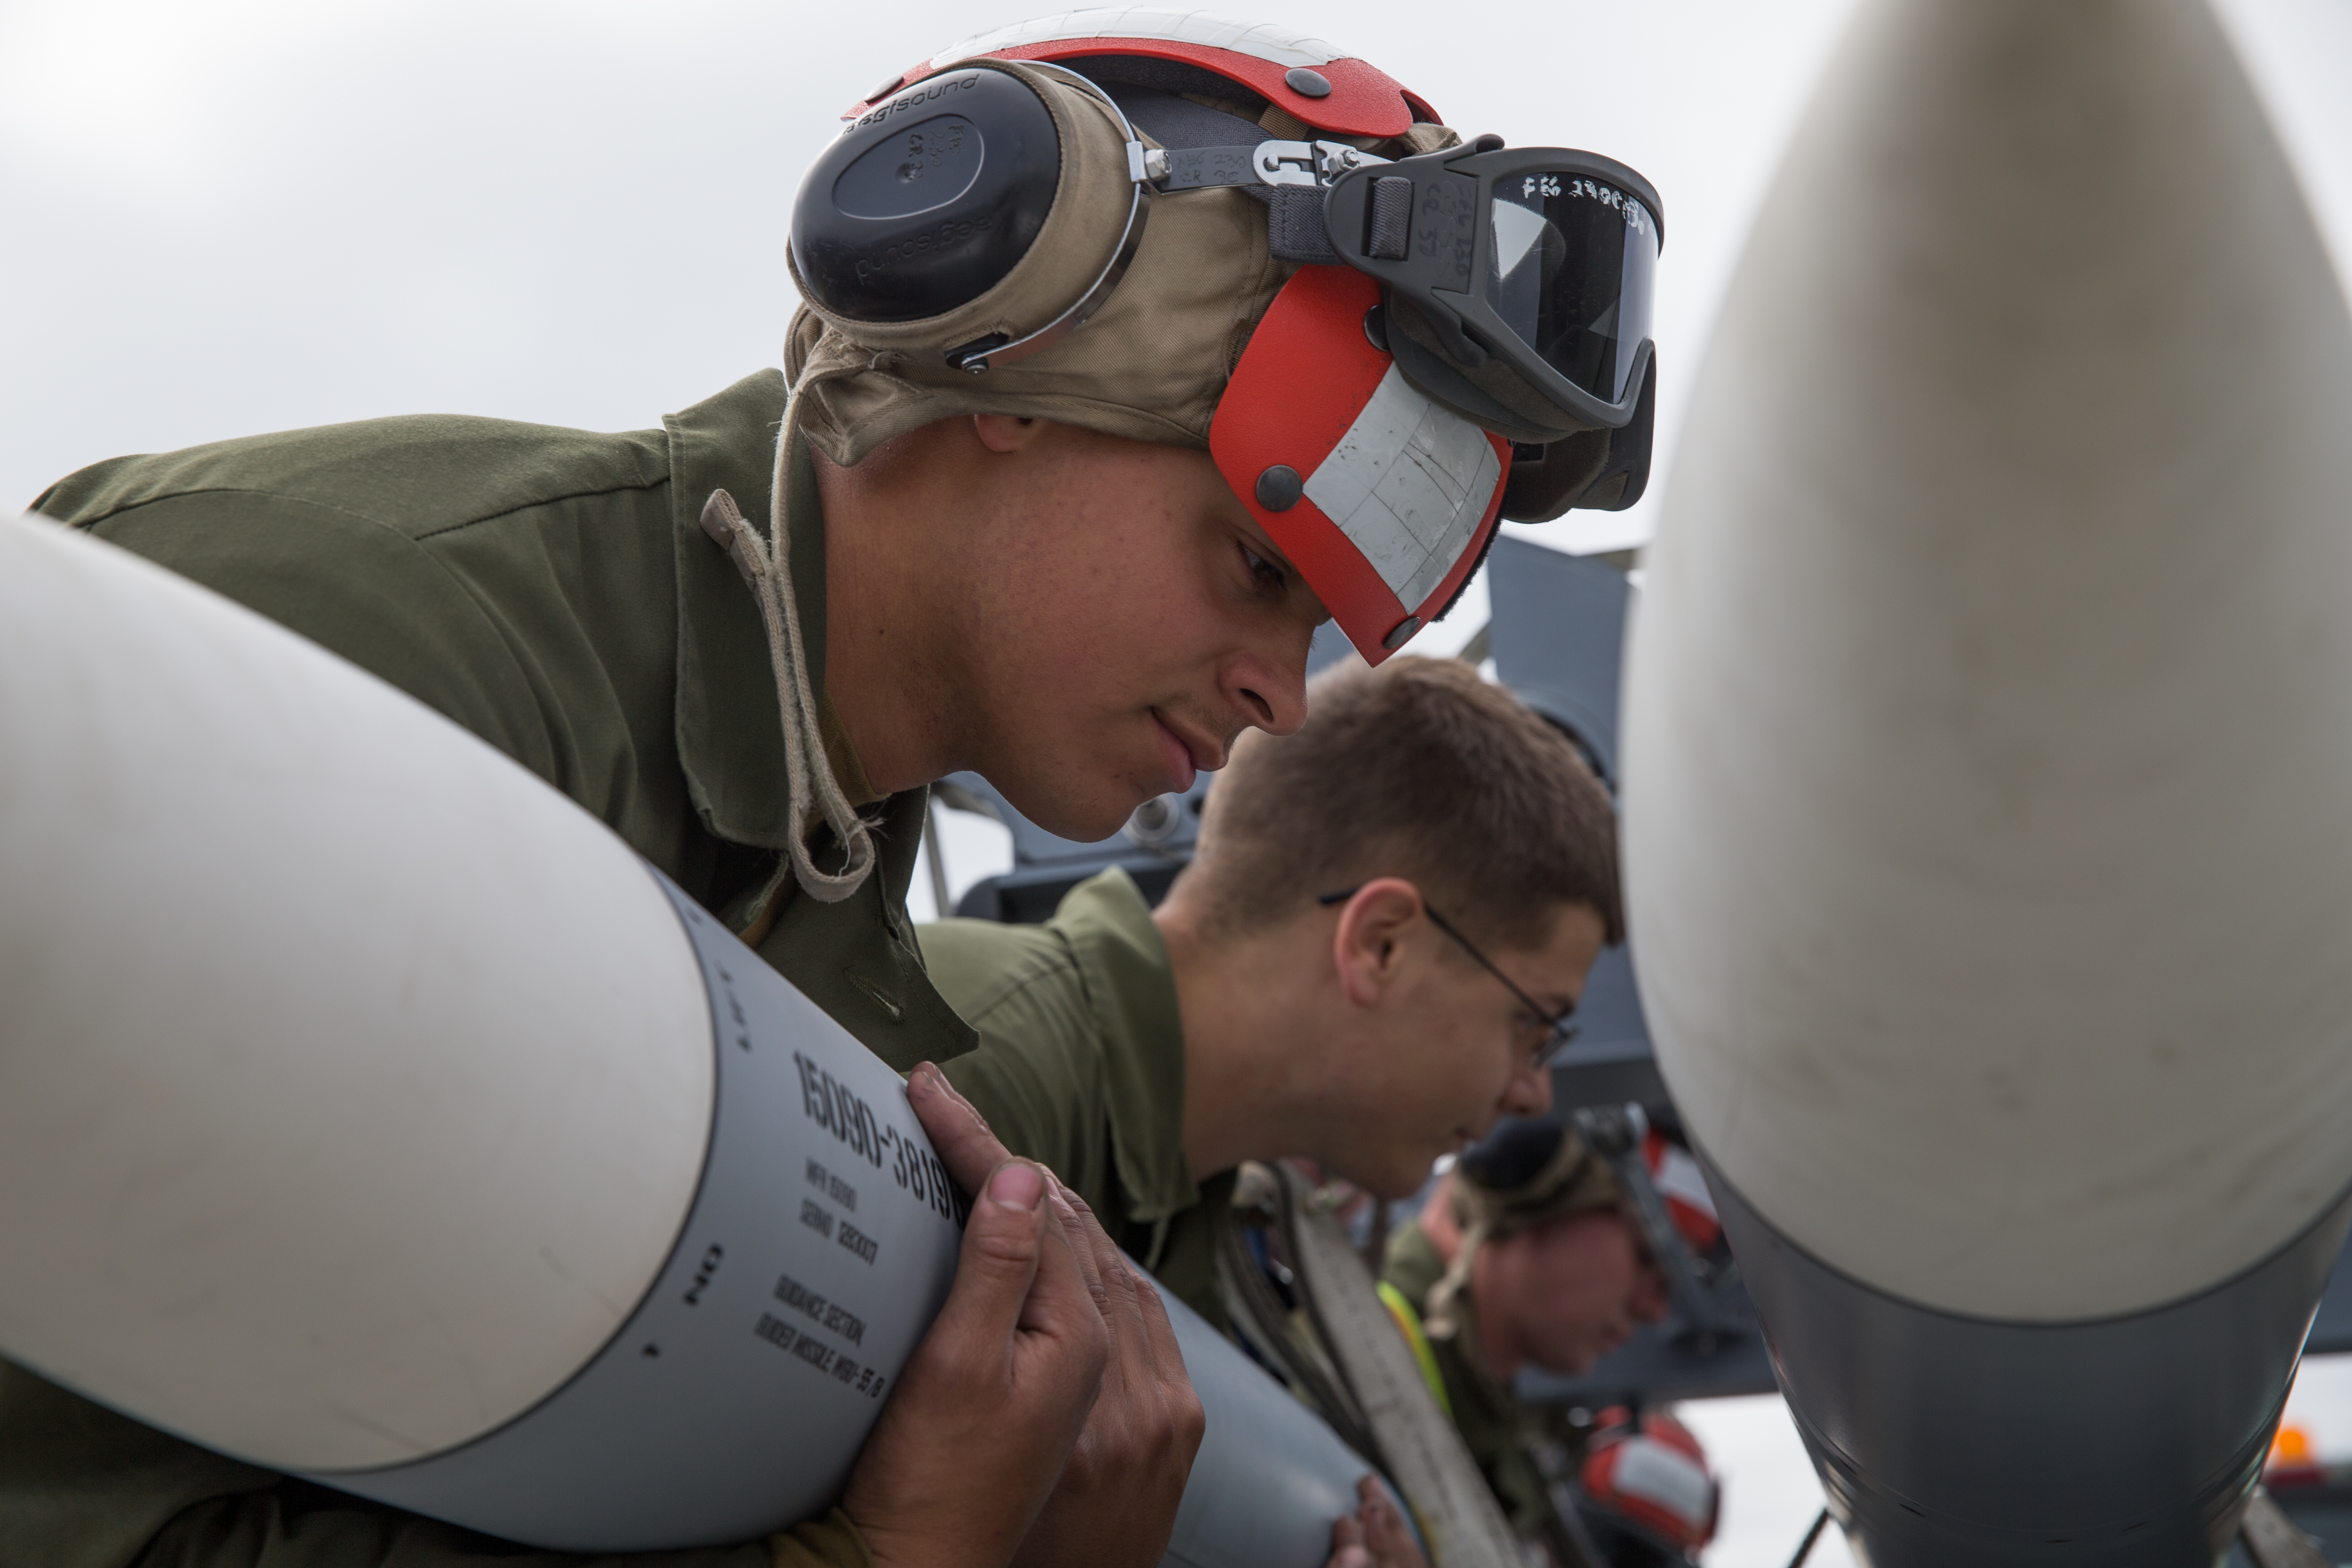 U.S. Marines assigned to Marine Fighter Attack Squadron 251 carry ordnance to an F/A-18C Hornet during Red Flag-Alaska 17-2 on Joint Base Elmendorf-Richardson, Alaska, June 20, 2017. Red Flag Alaska provides an optimal training environment in the Indo-Asian Pacific region and focuses on improving ground, space, and cyberspace combat readiness and interoperability for U.S. and international forces. (U.S. Marine Corps photo by Lance Cpl. Koby I. Saunders)